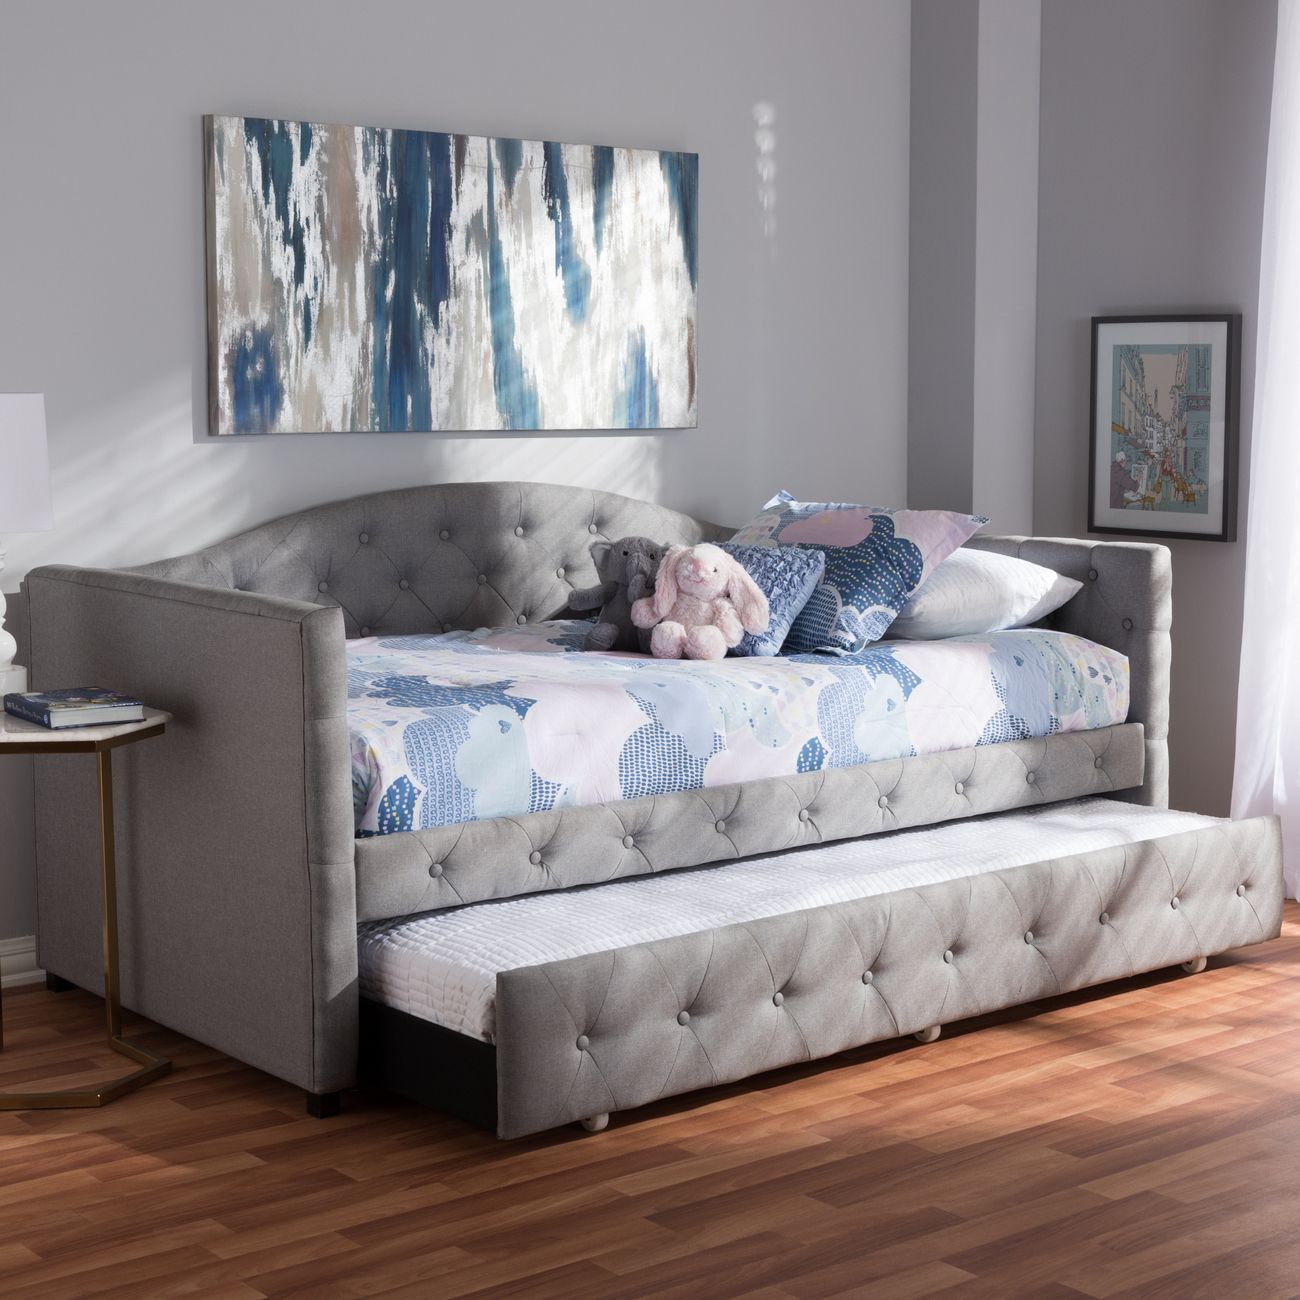 Inviting Upholstered Daybed Transform Your Space with a Cozy Upholstered Daybed That Will Make Your Home Feel Like a Luxurious Retreat